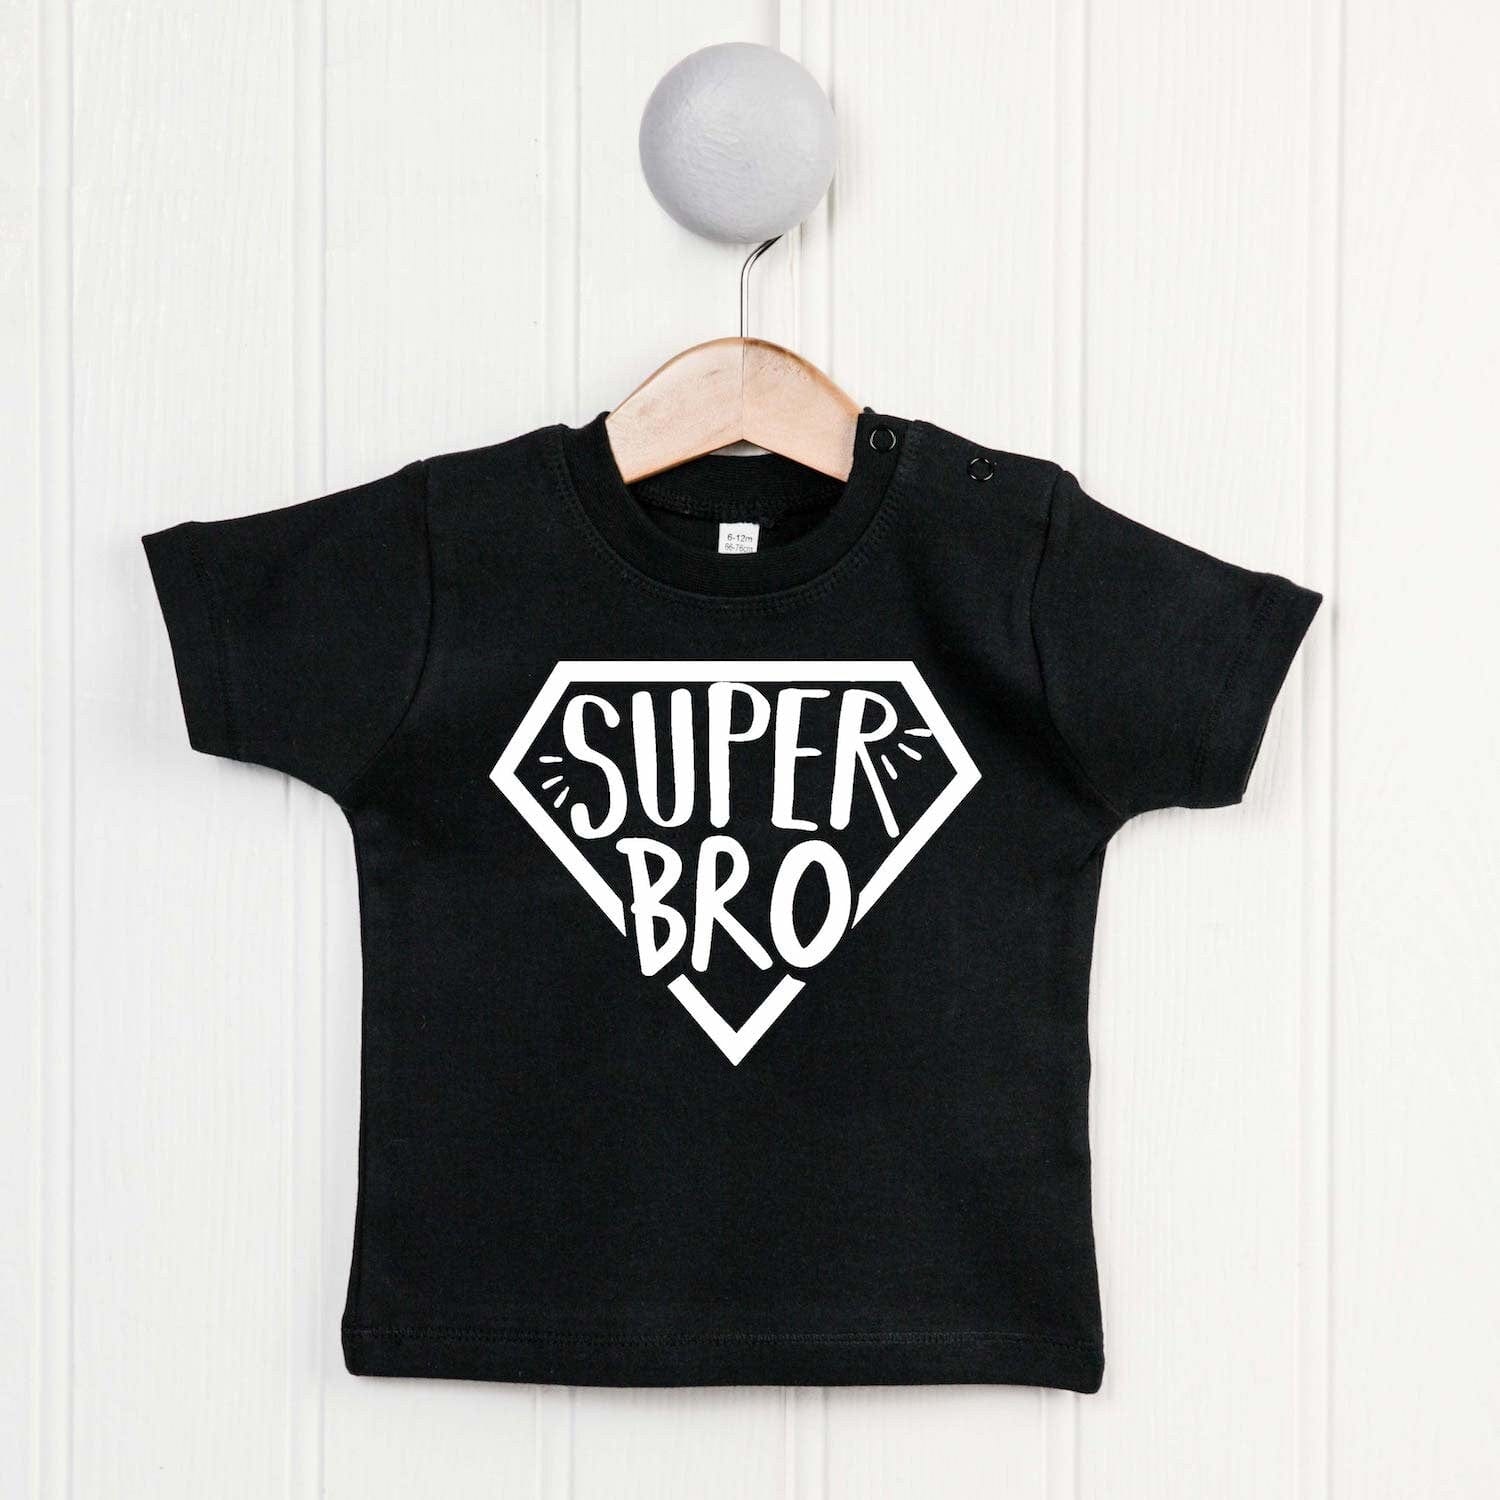 Super Bro Brother T Shirt, super hero boys birthday gift for brother kids tee, cute kids shirt, cute kids clothes, boys sibling t-shirt